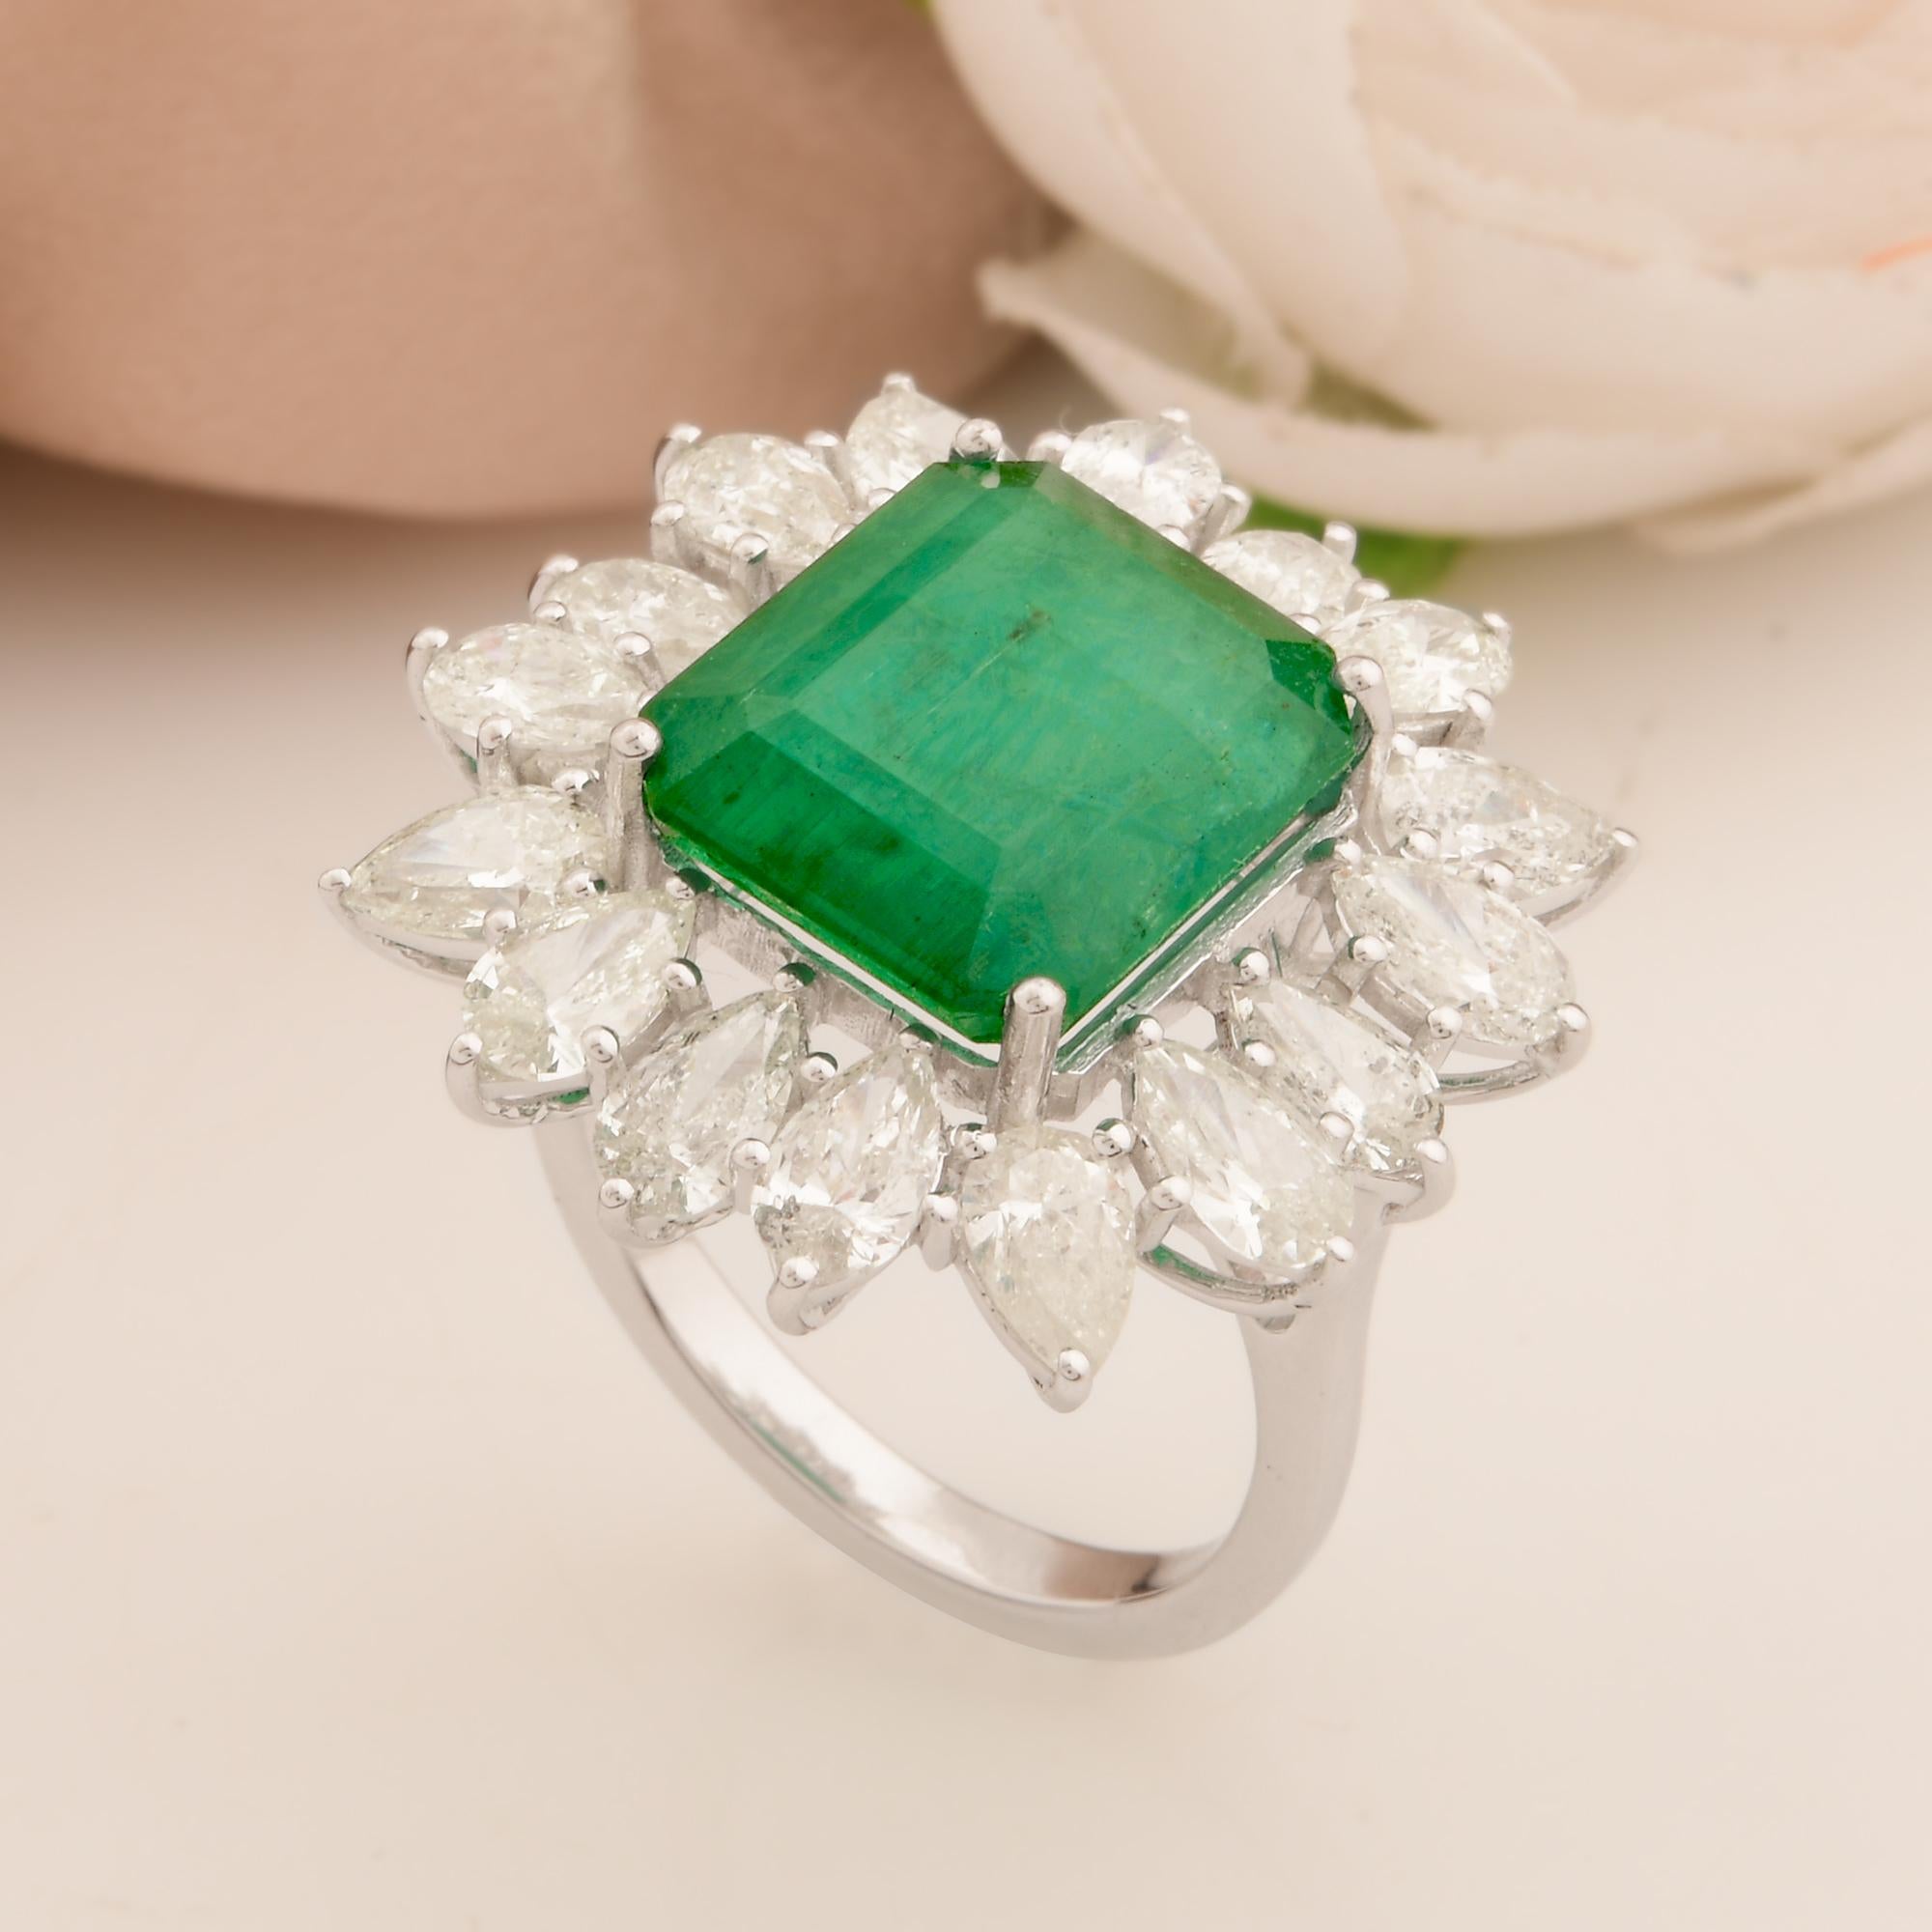 For Sale:  Zambian Emerald Cocktail Ring Pear Diamond Solid 18k White Gold Fine Jewelry 4